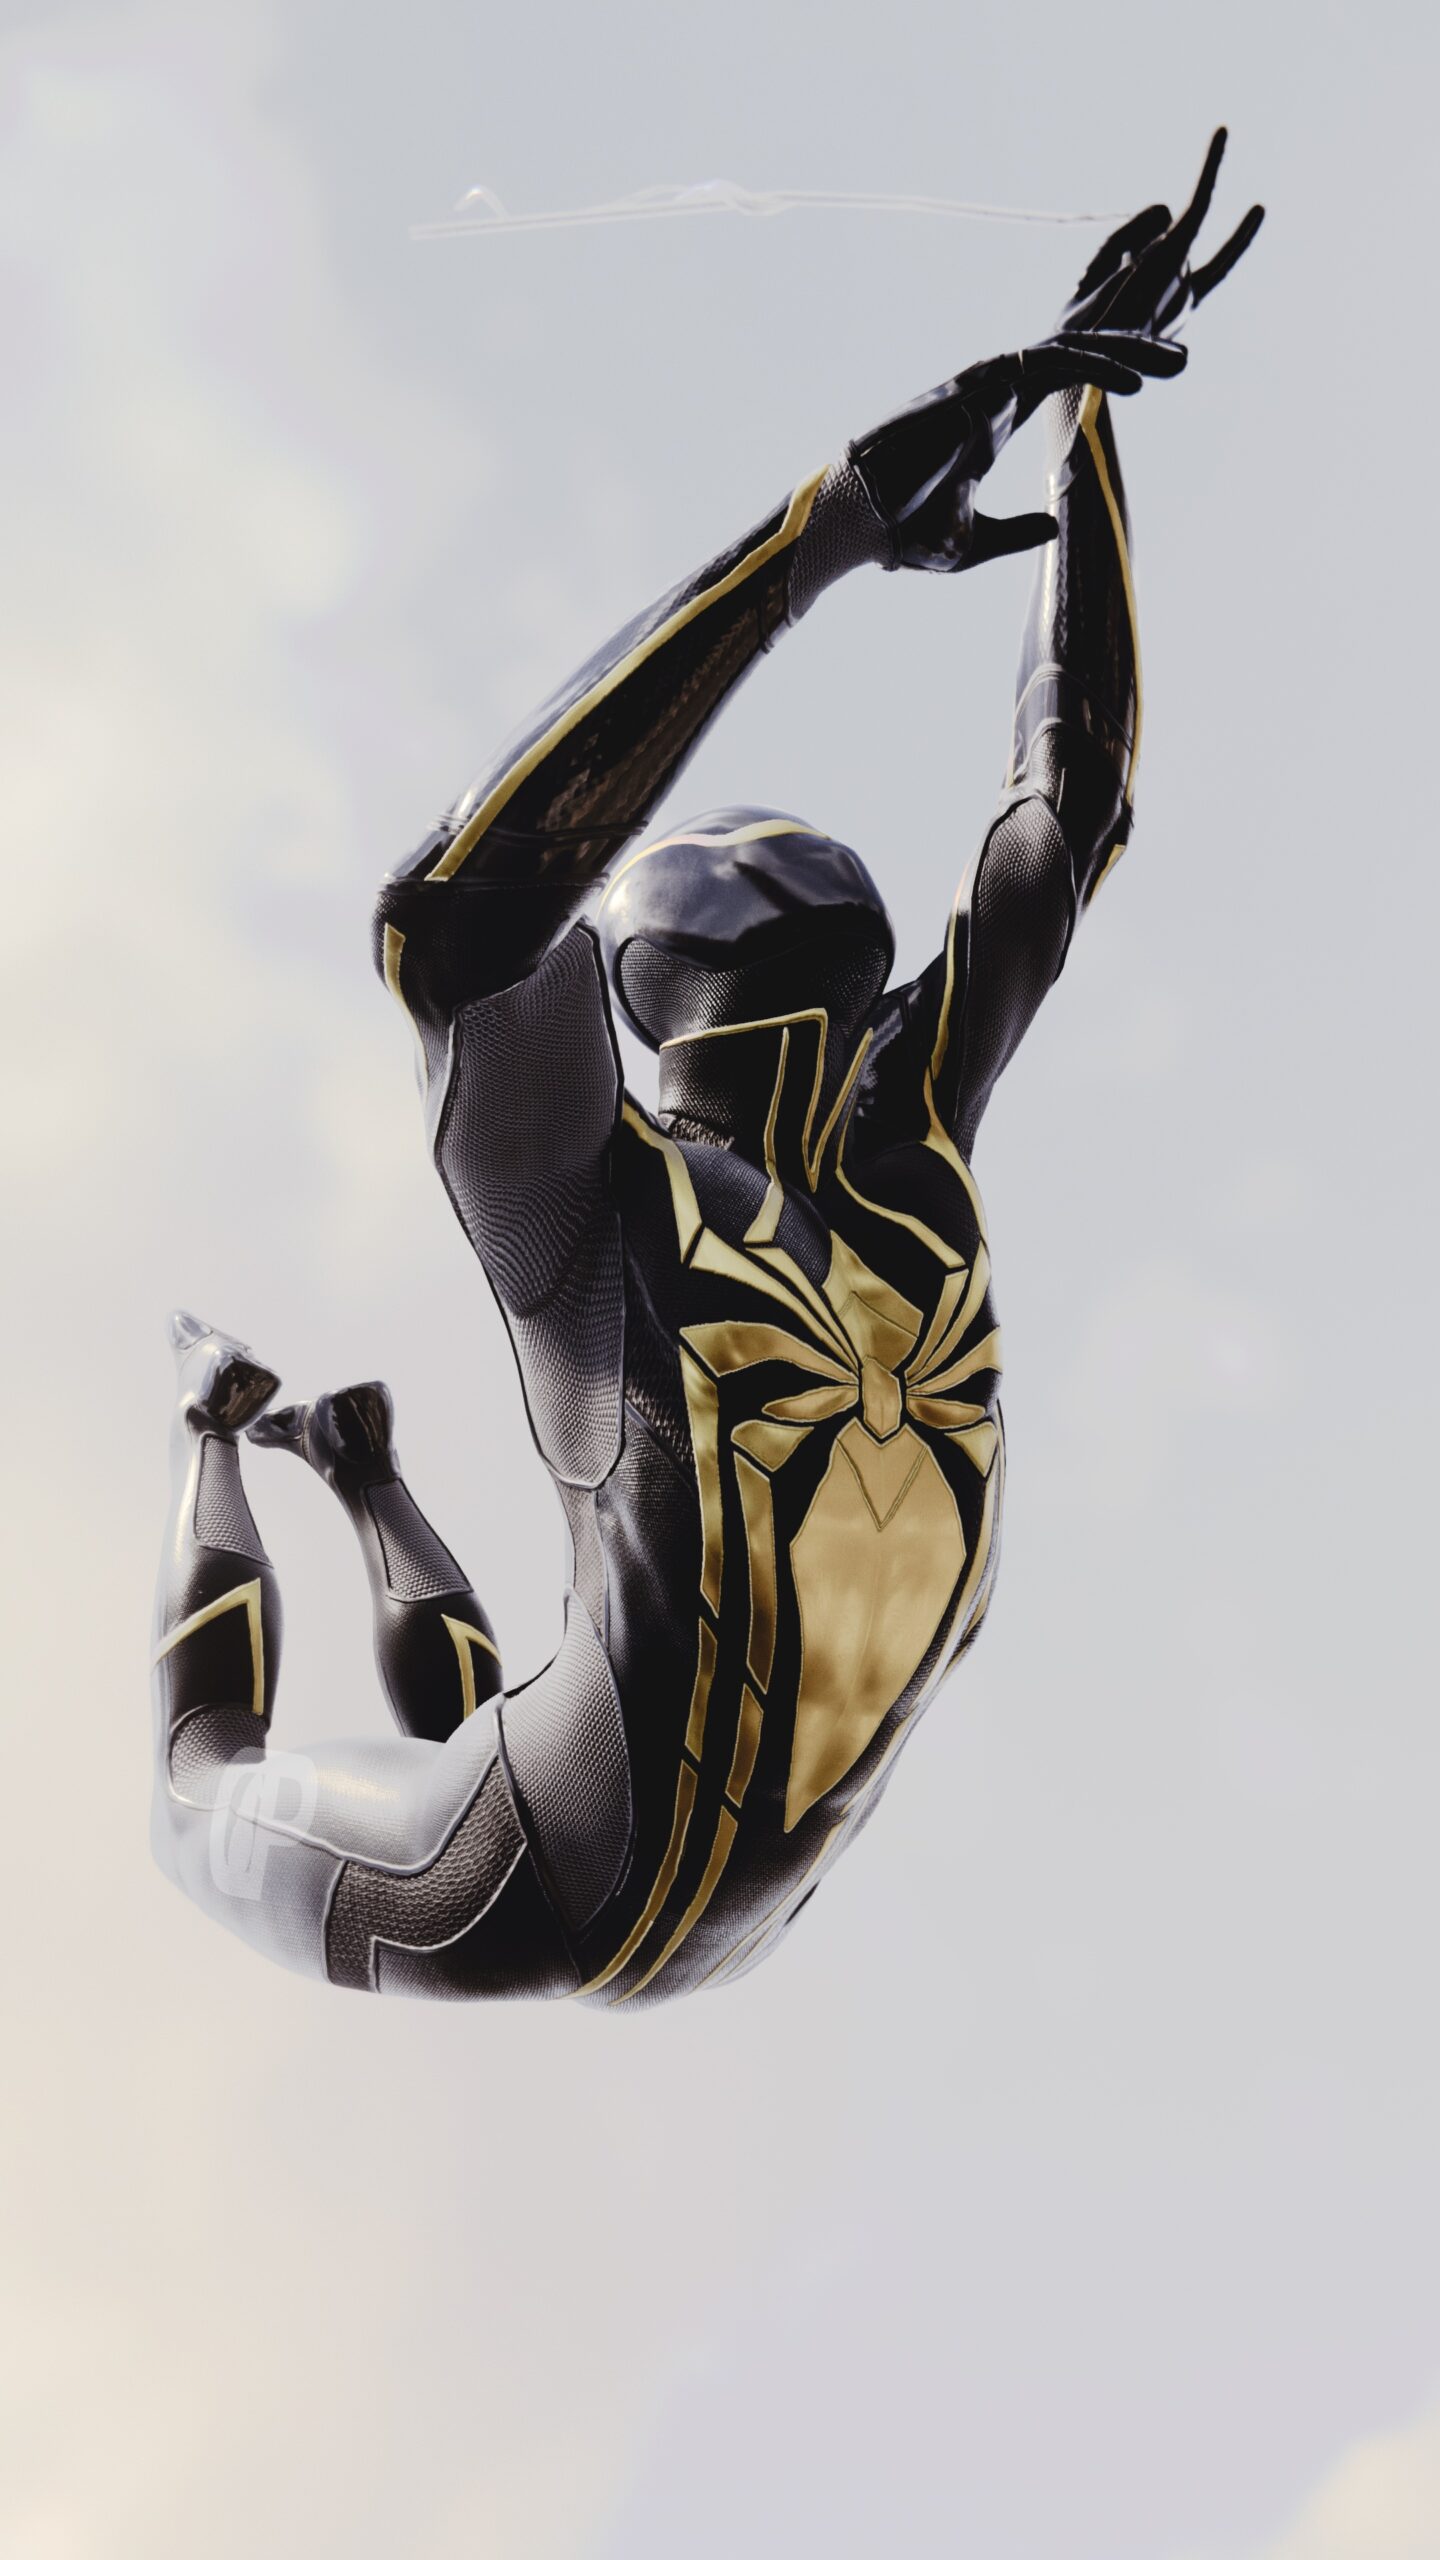 In-game photograph of black and gold spiderman swinging through the air